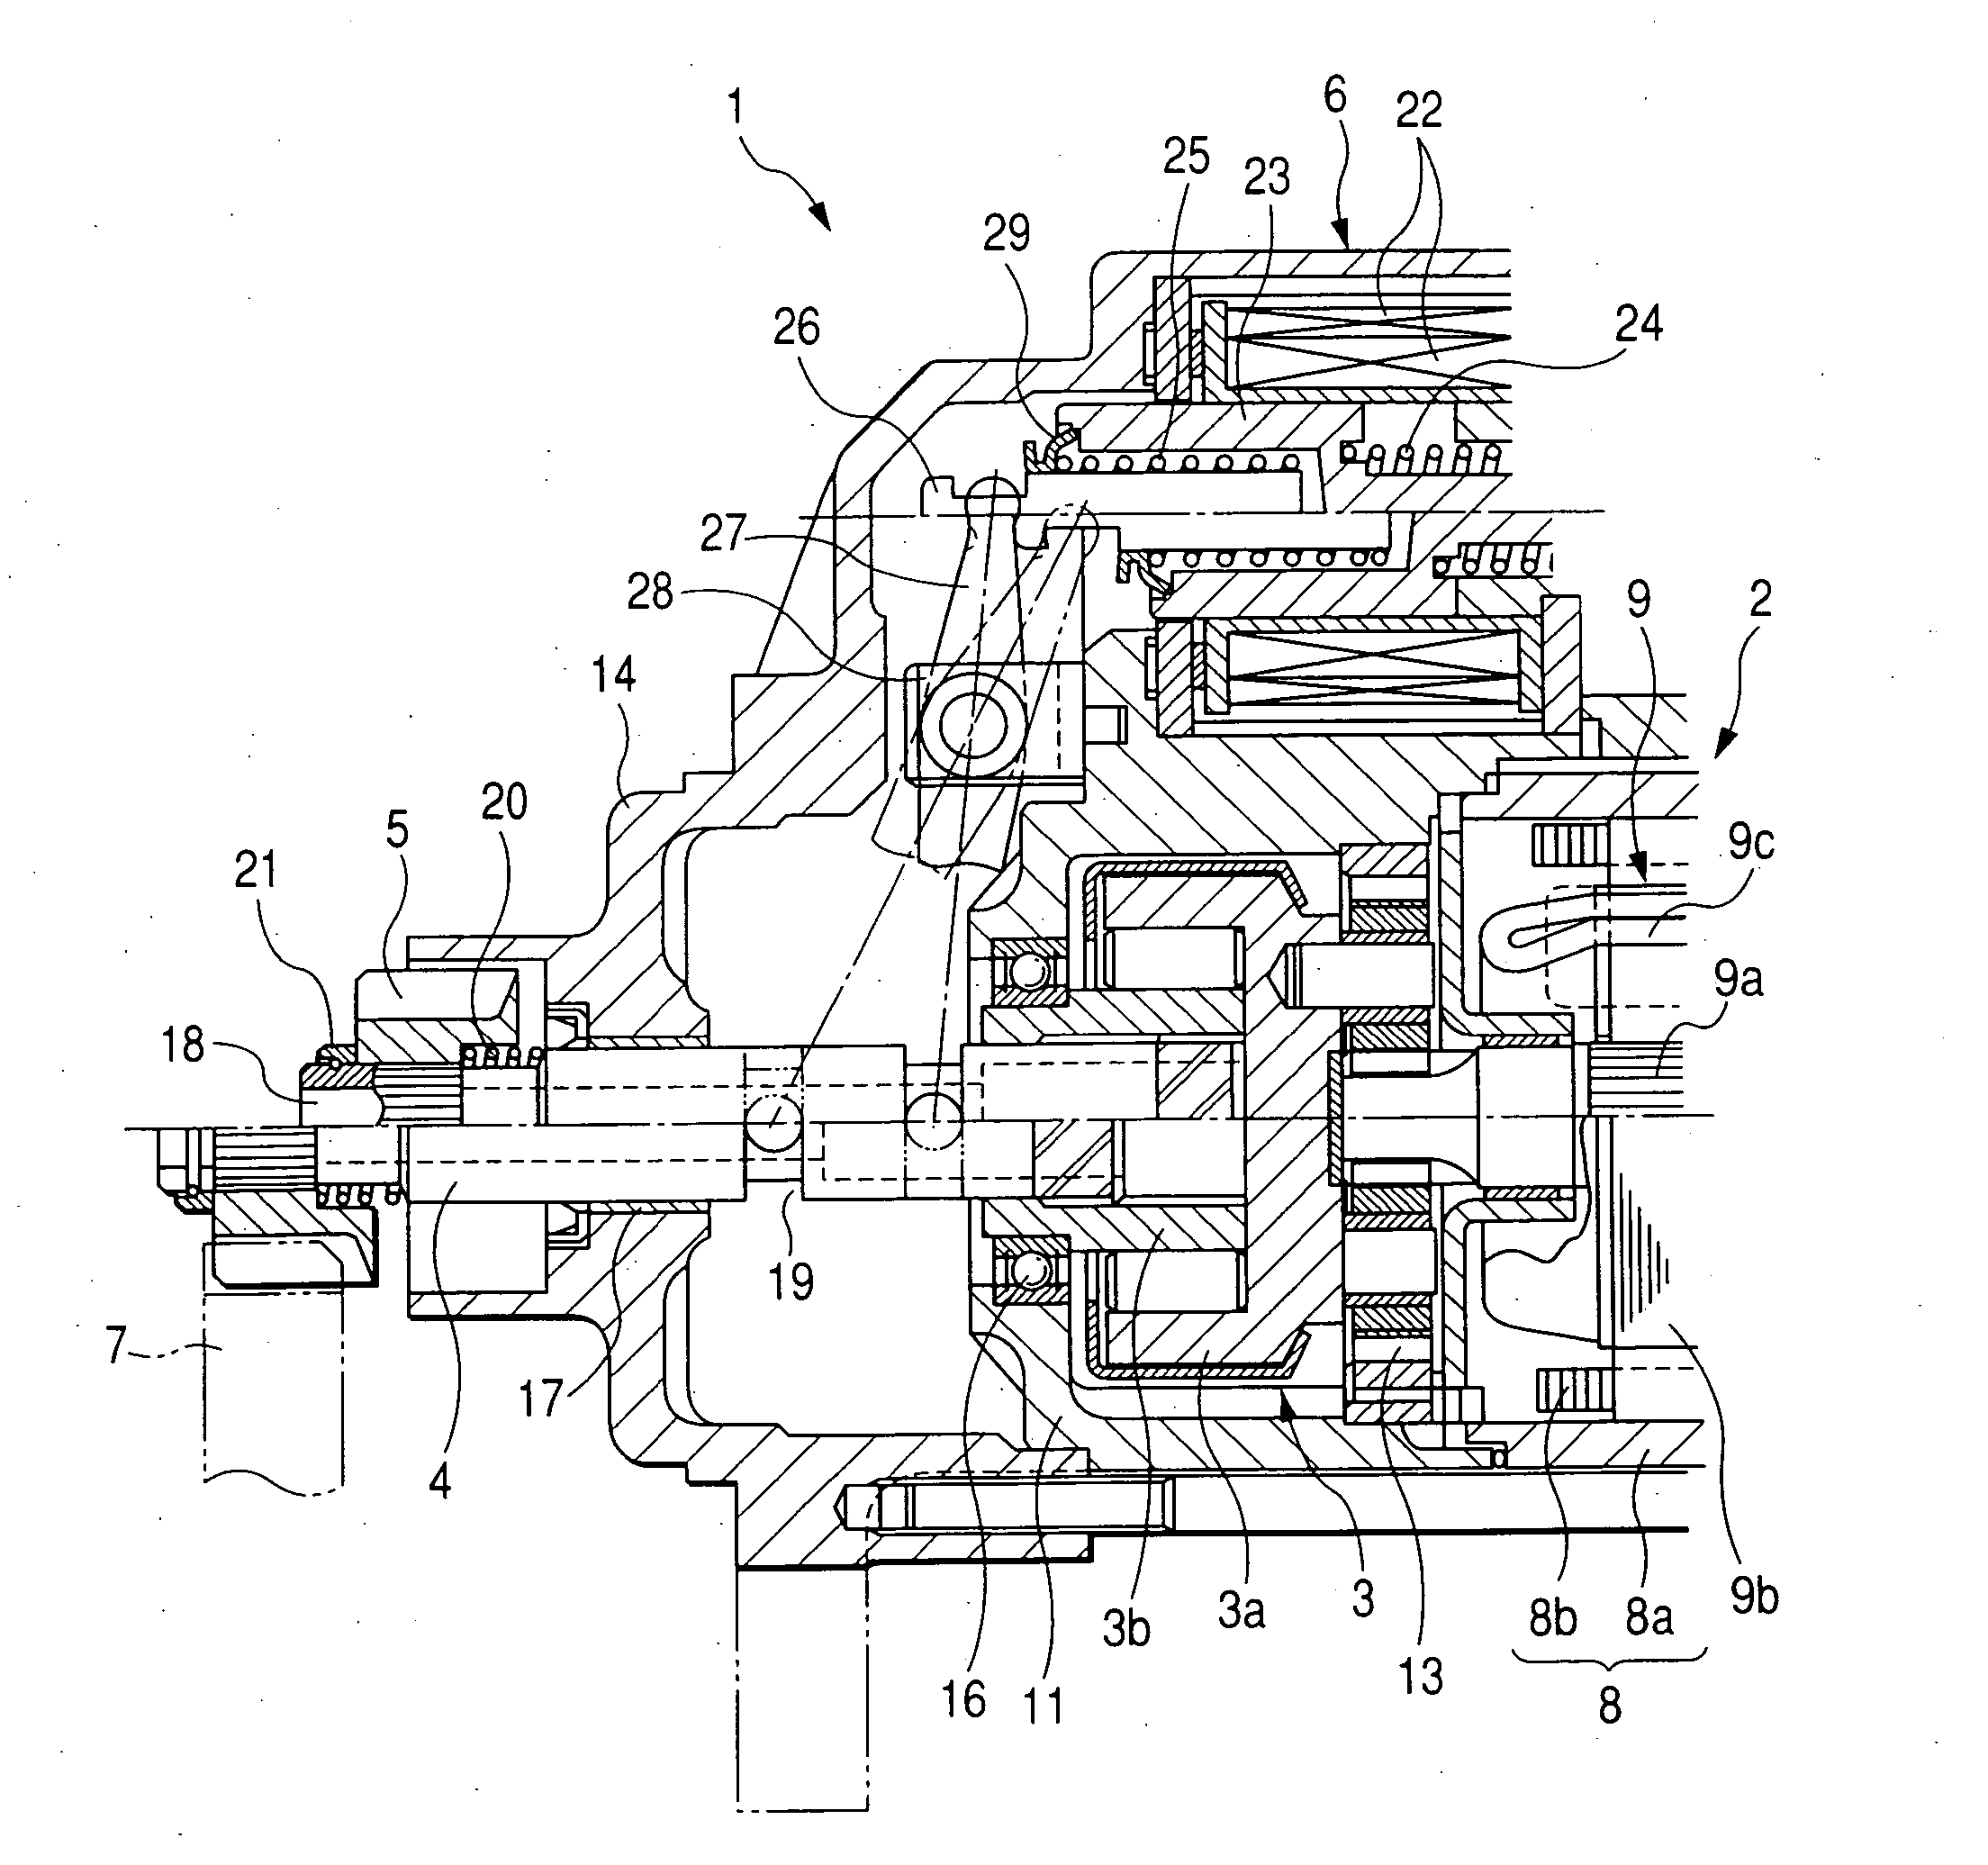 Engine starter designed to have enhanced stability of engagement of pinion with ring gear